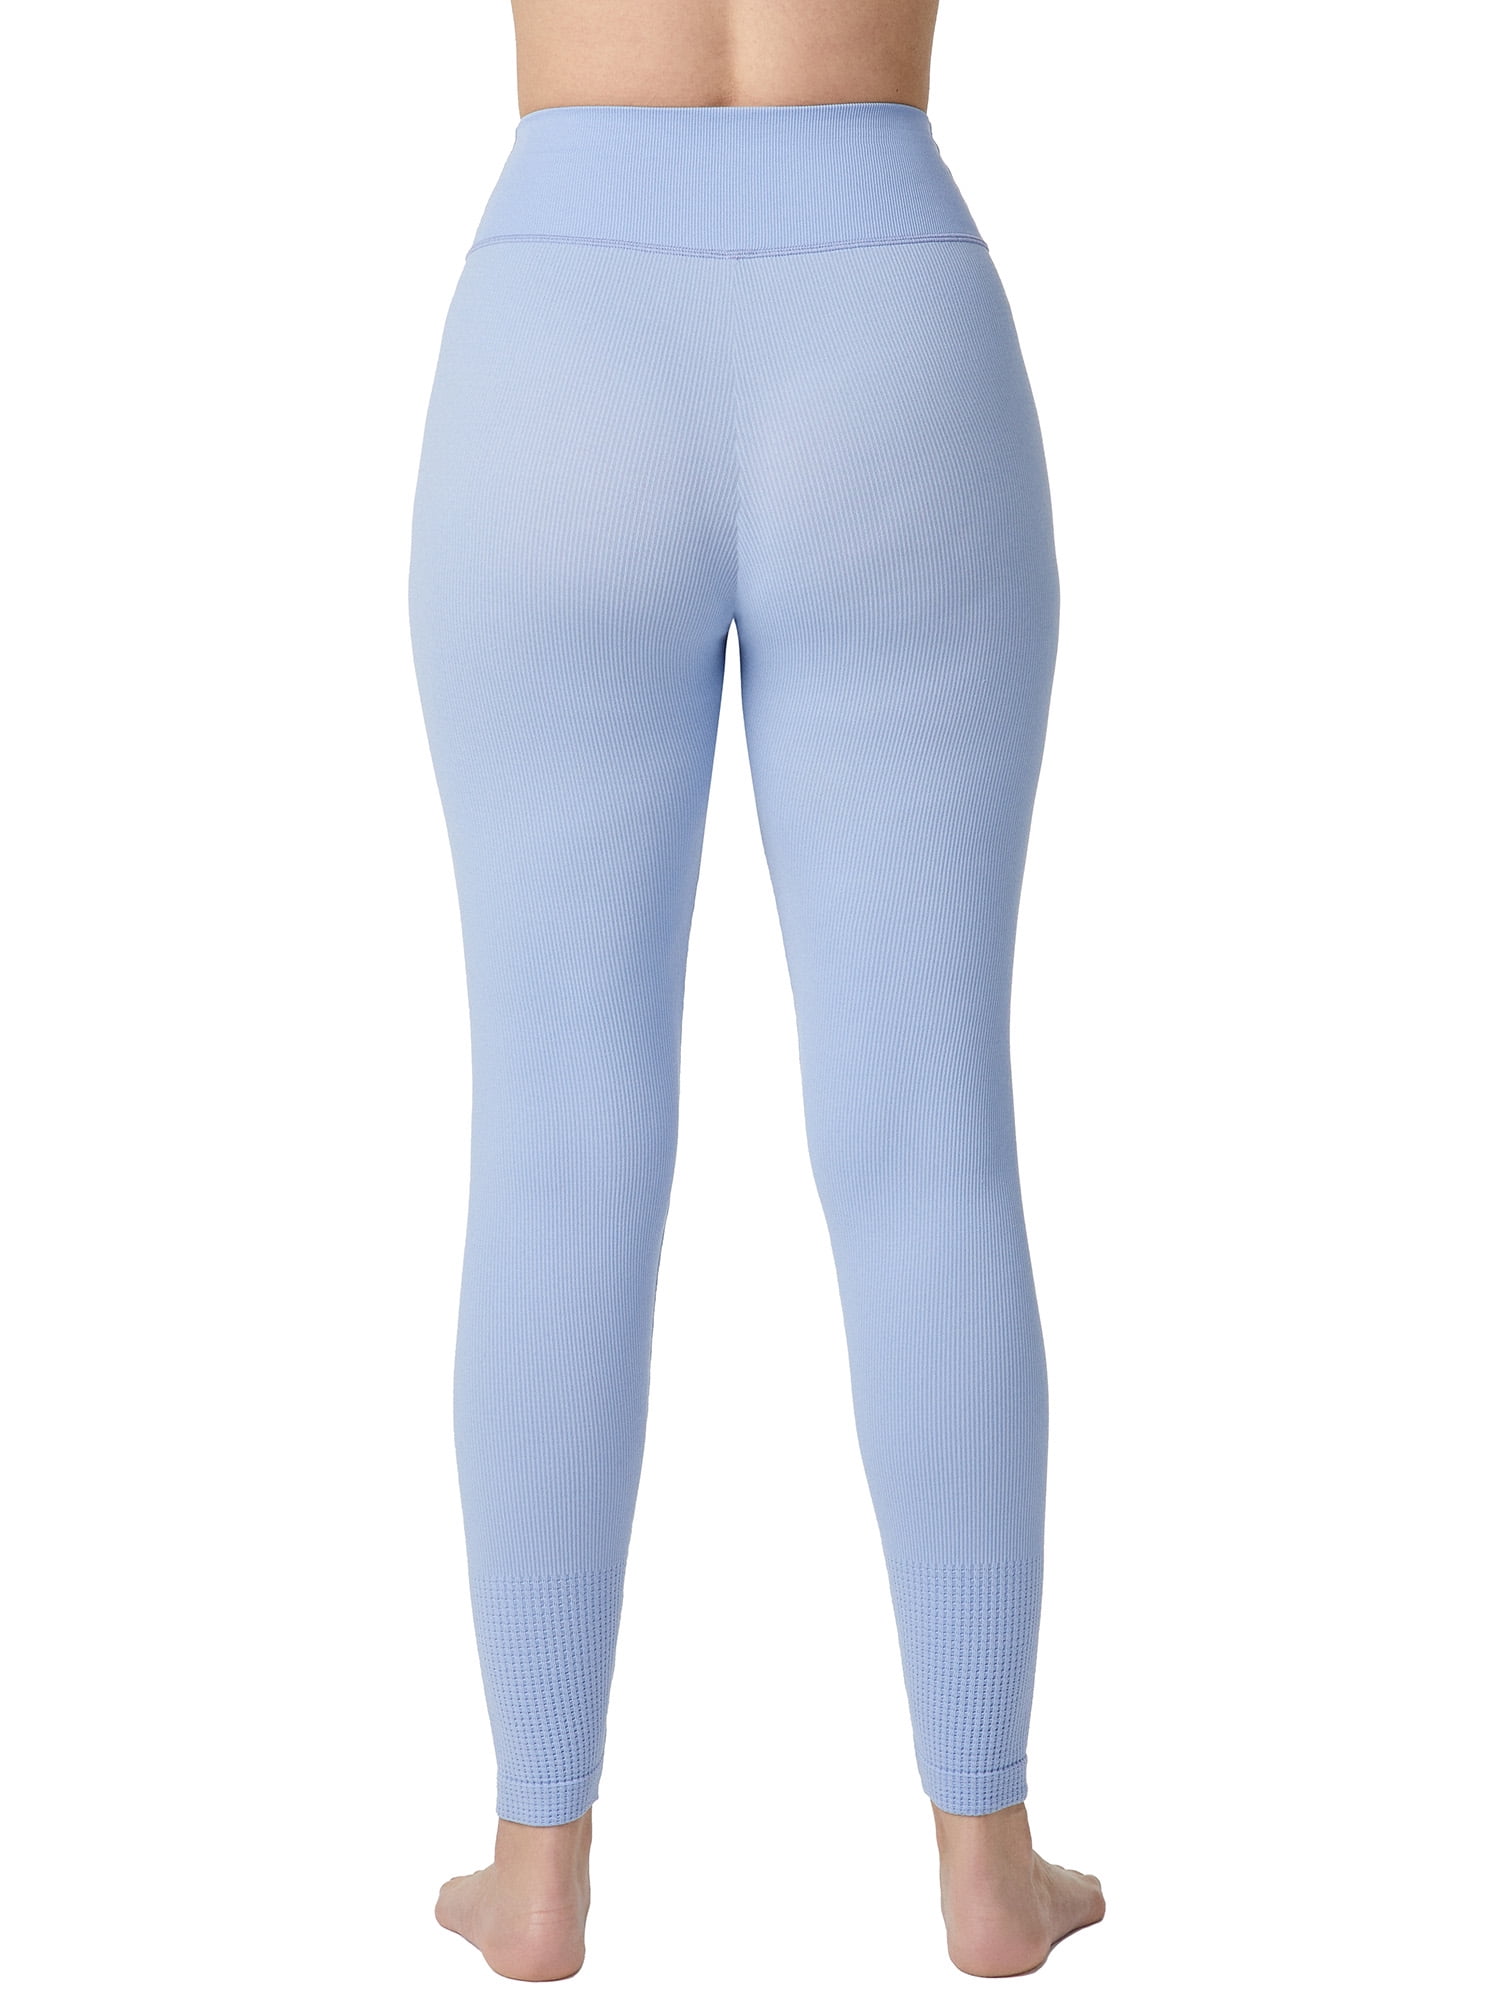 kindly yours Women's Sustainable Seamless Thermal Leggings 